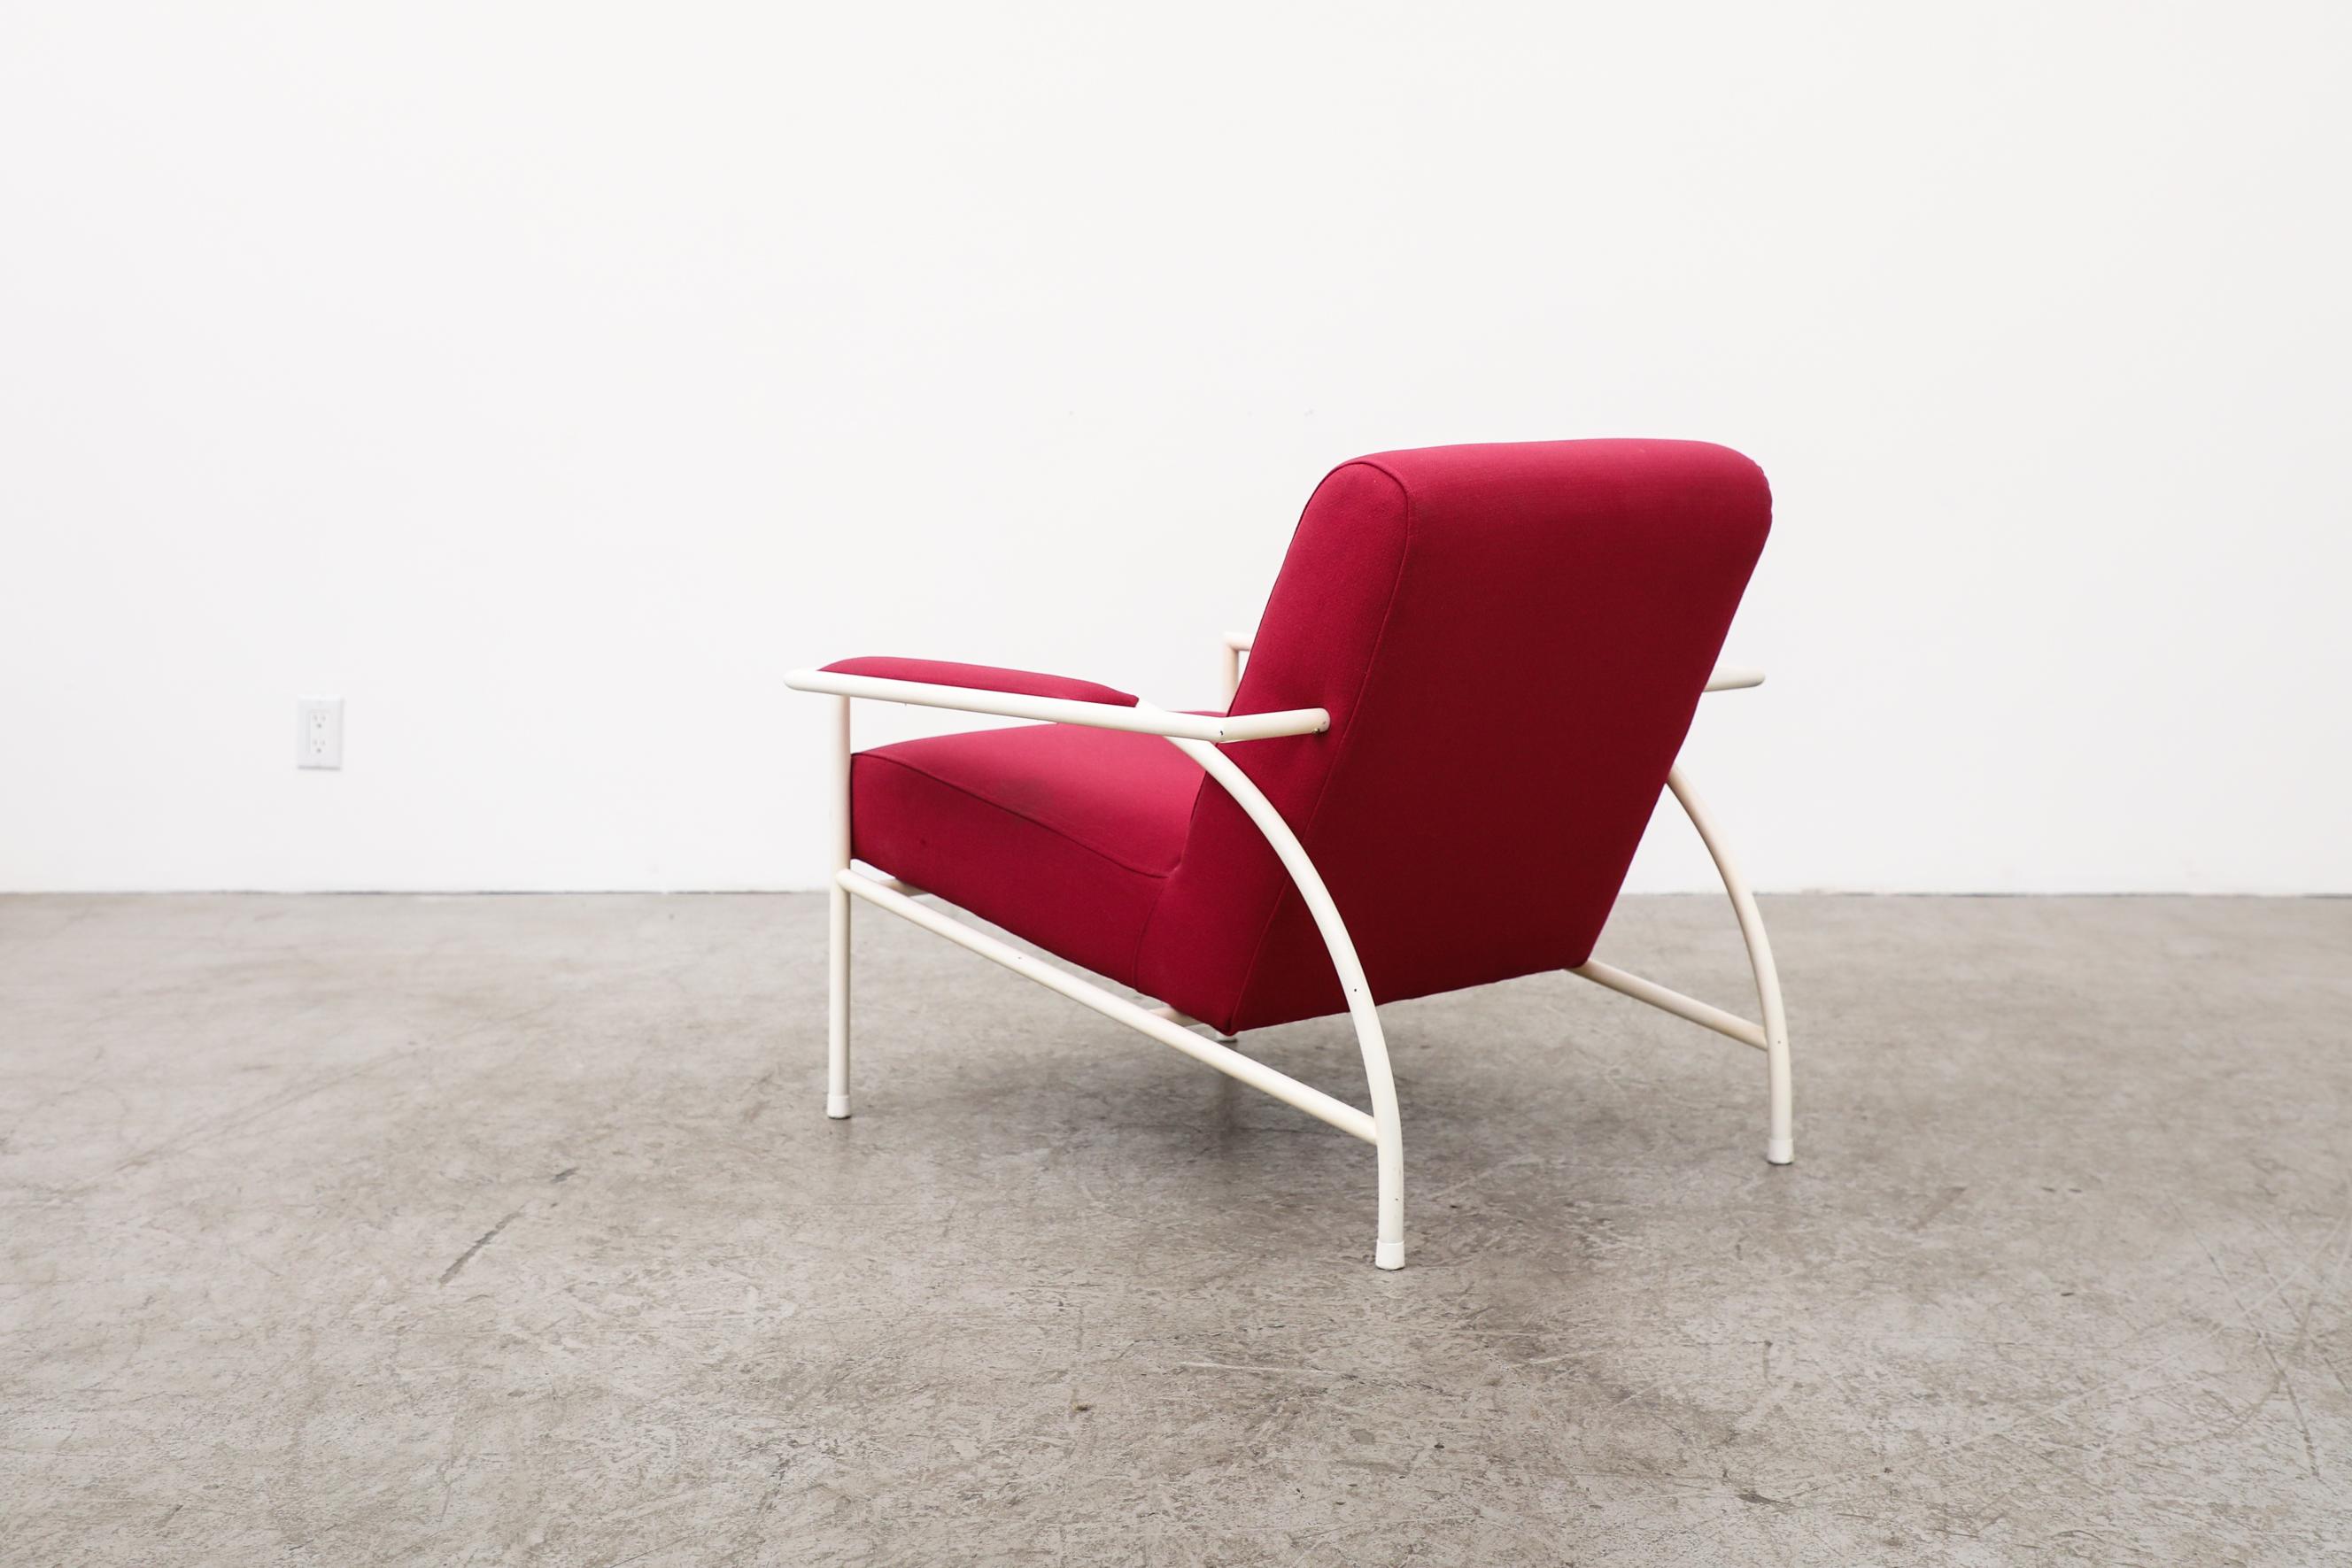 Late 20th Century Gerard Vollenbrock Pink Lounge Chair w/ White Frame for Gelderland, 1980's For Sale